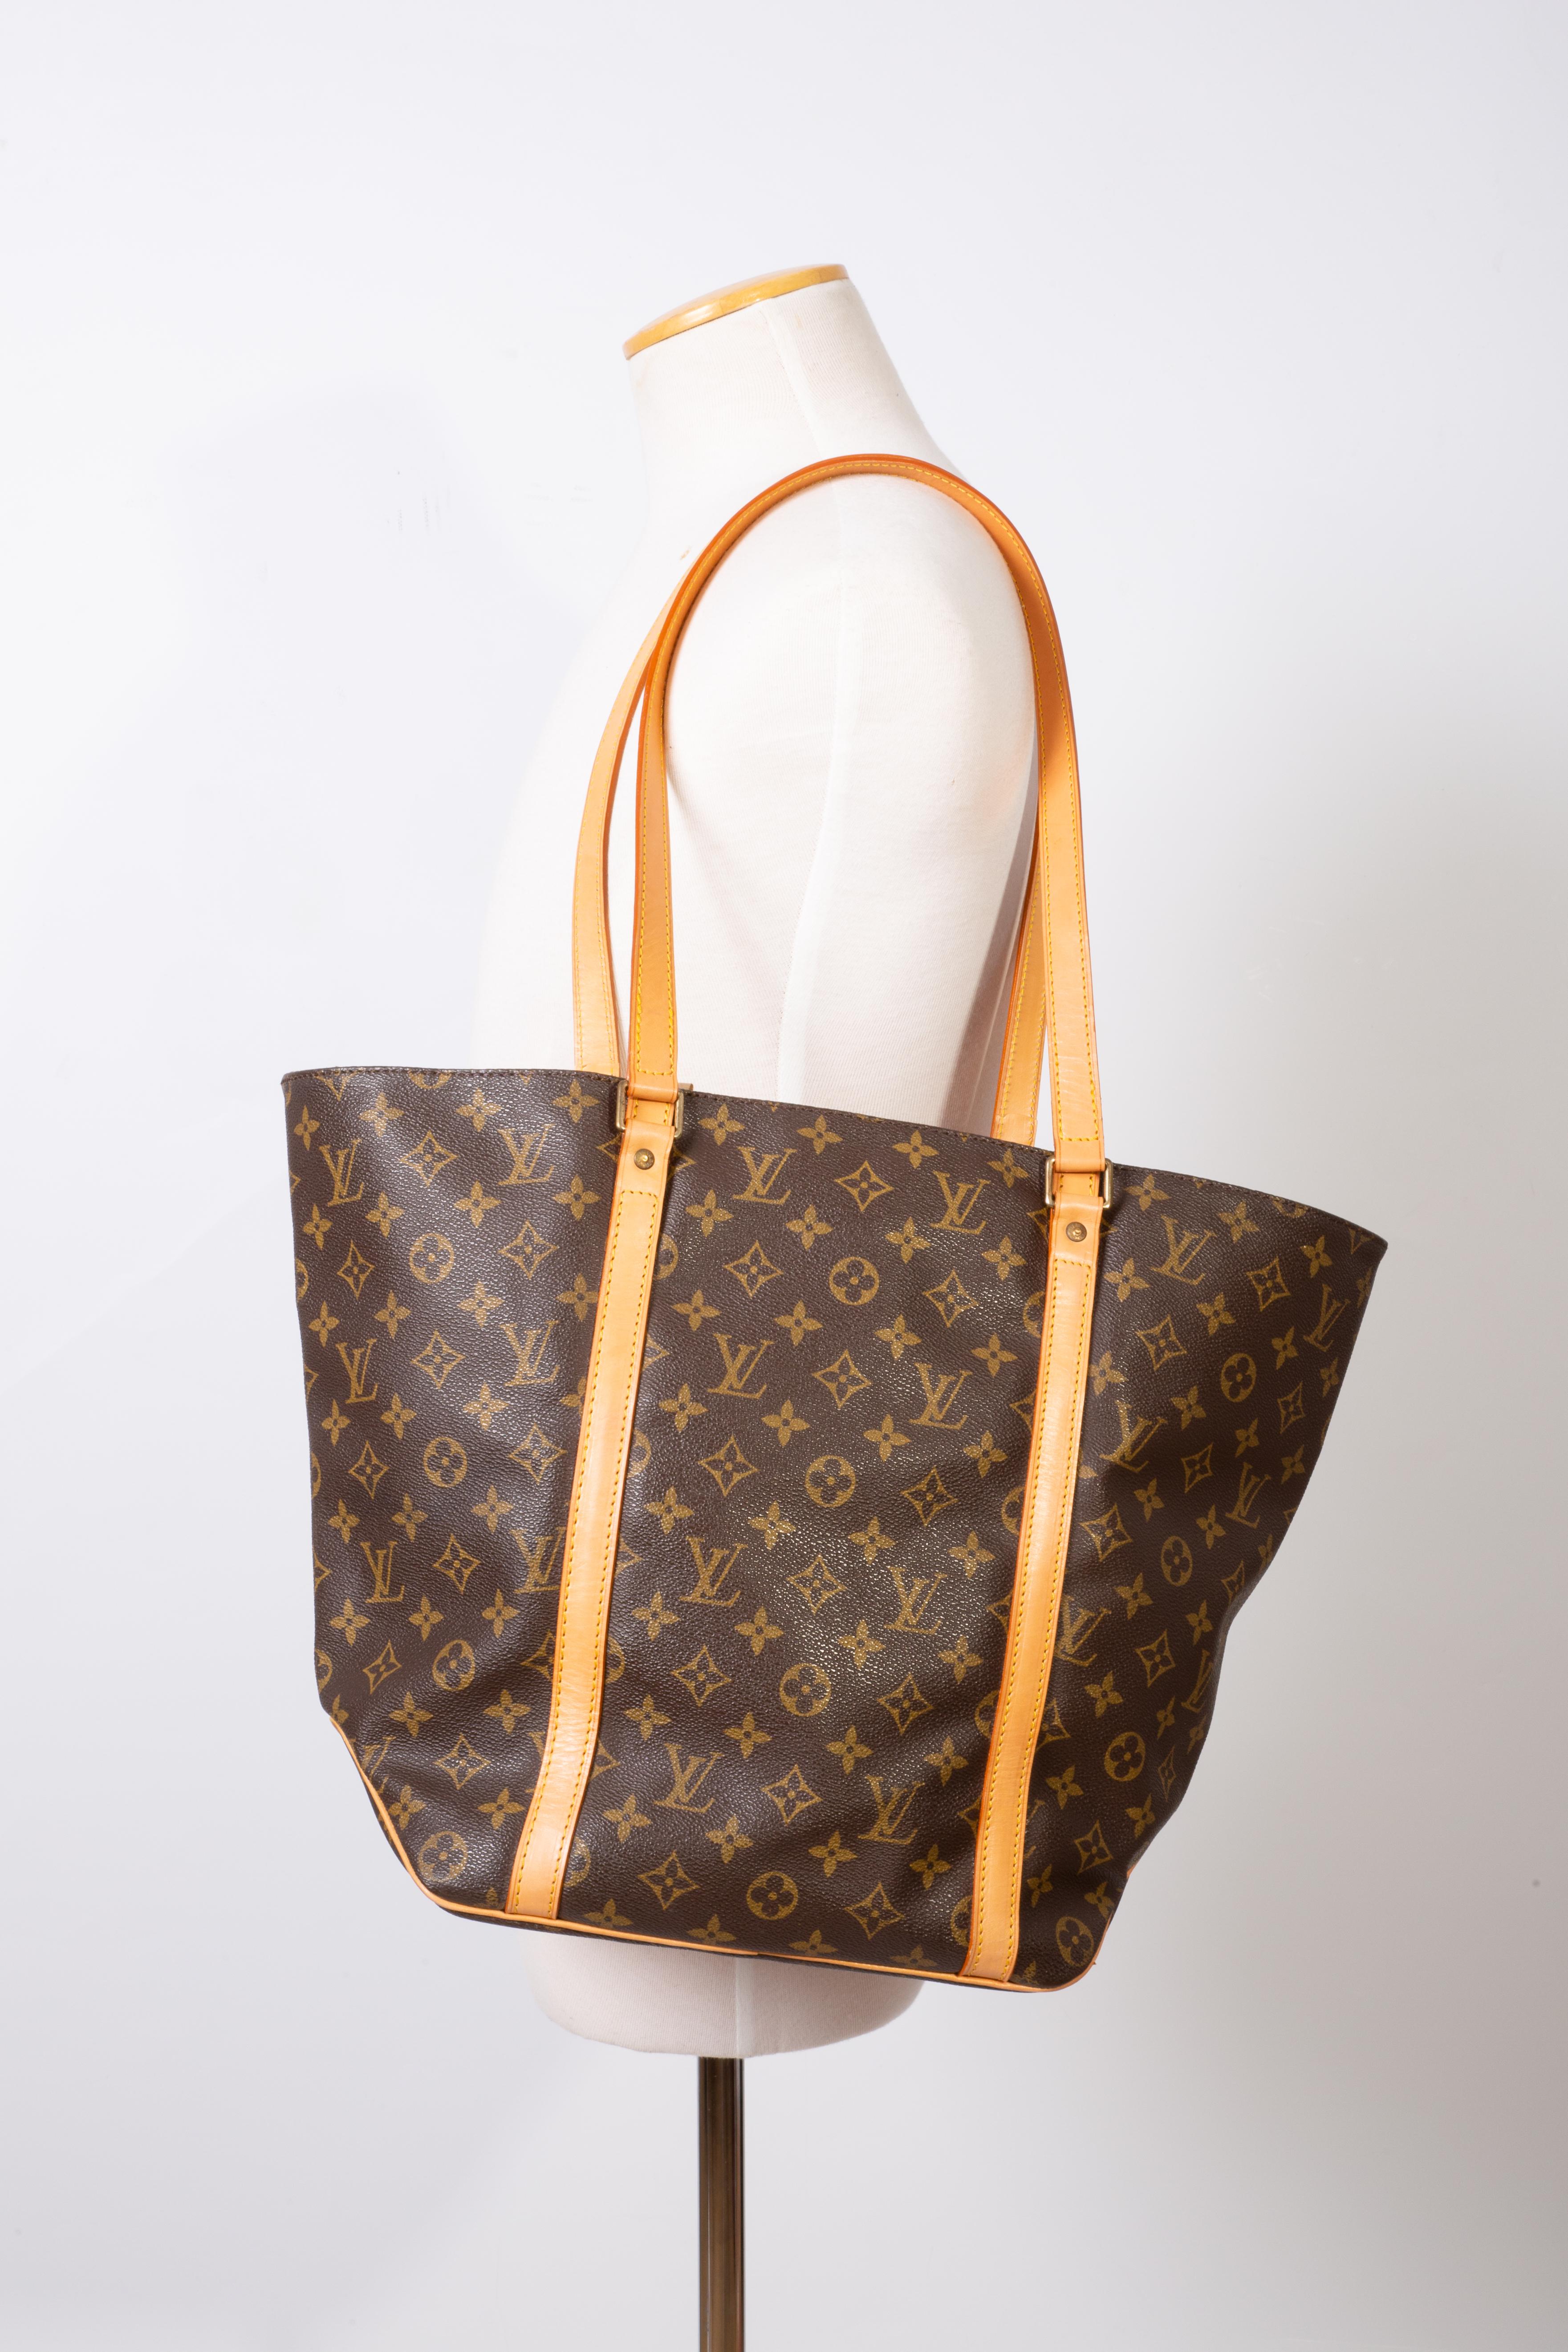 Louis Vuitton Monogram Sac Shopping Tote  In Good Condition In Montreal, Quebec